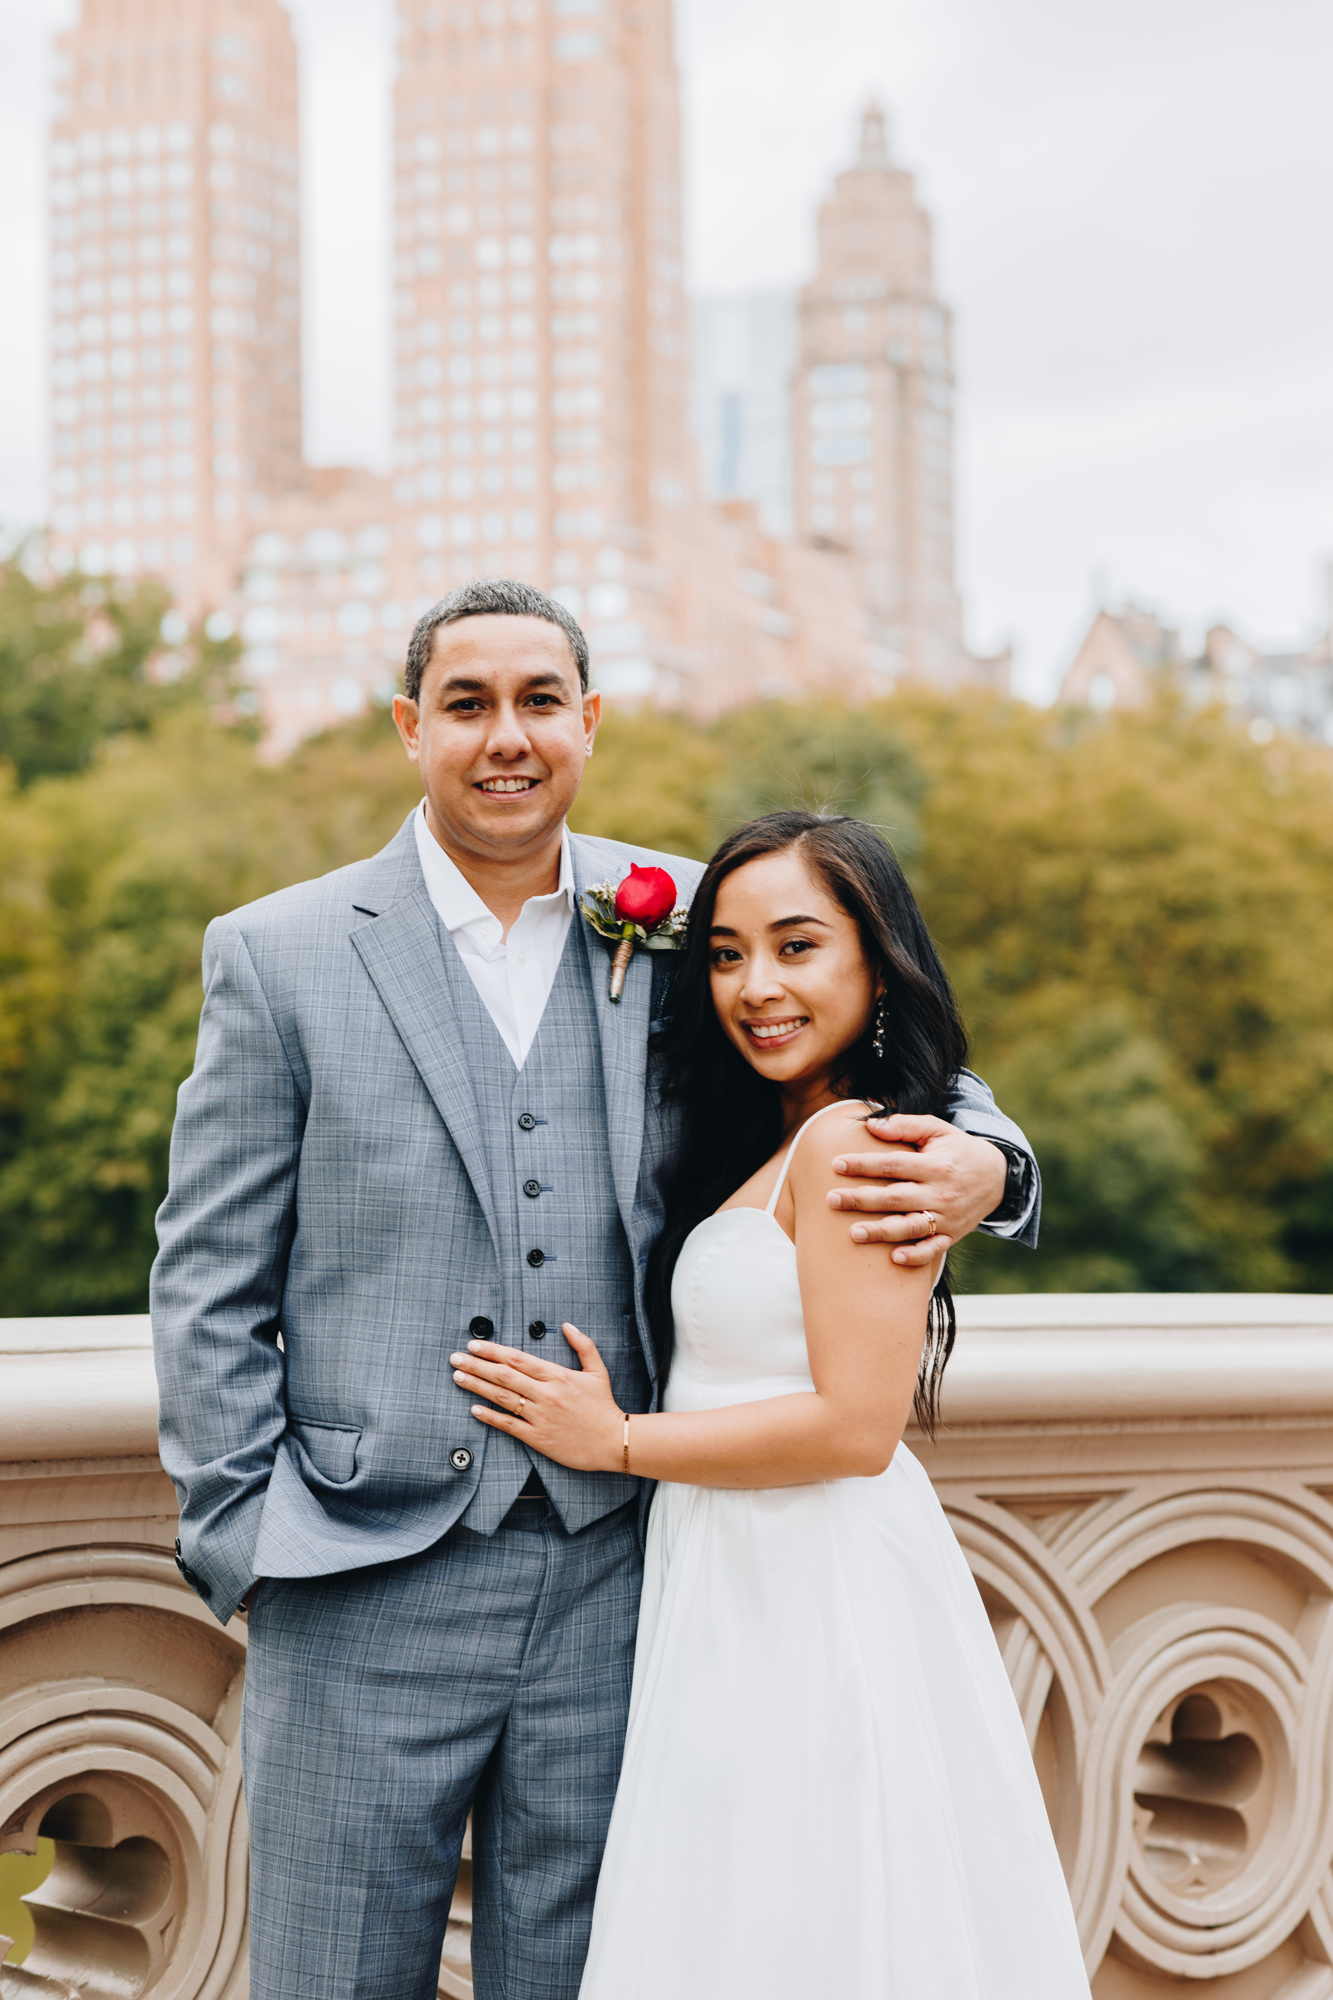 Intimate Bow Bridge Elopement Photos in Fall Foliage